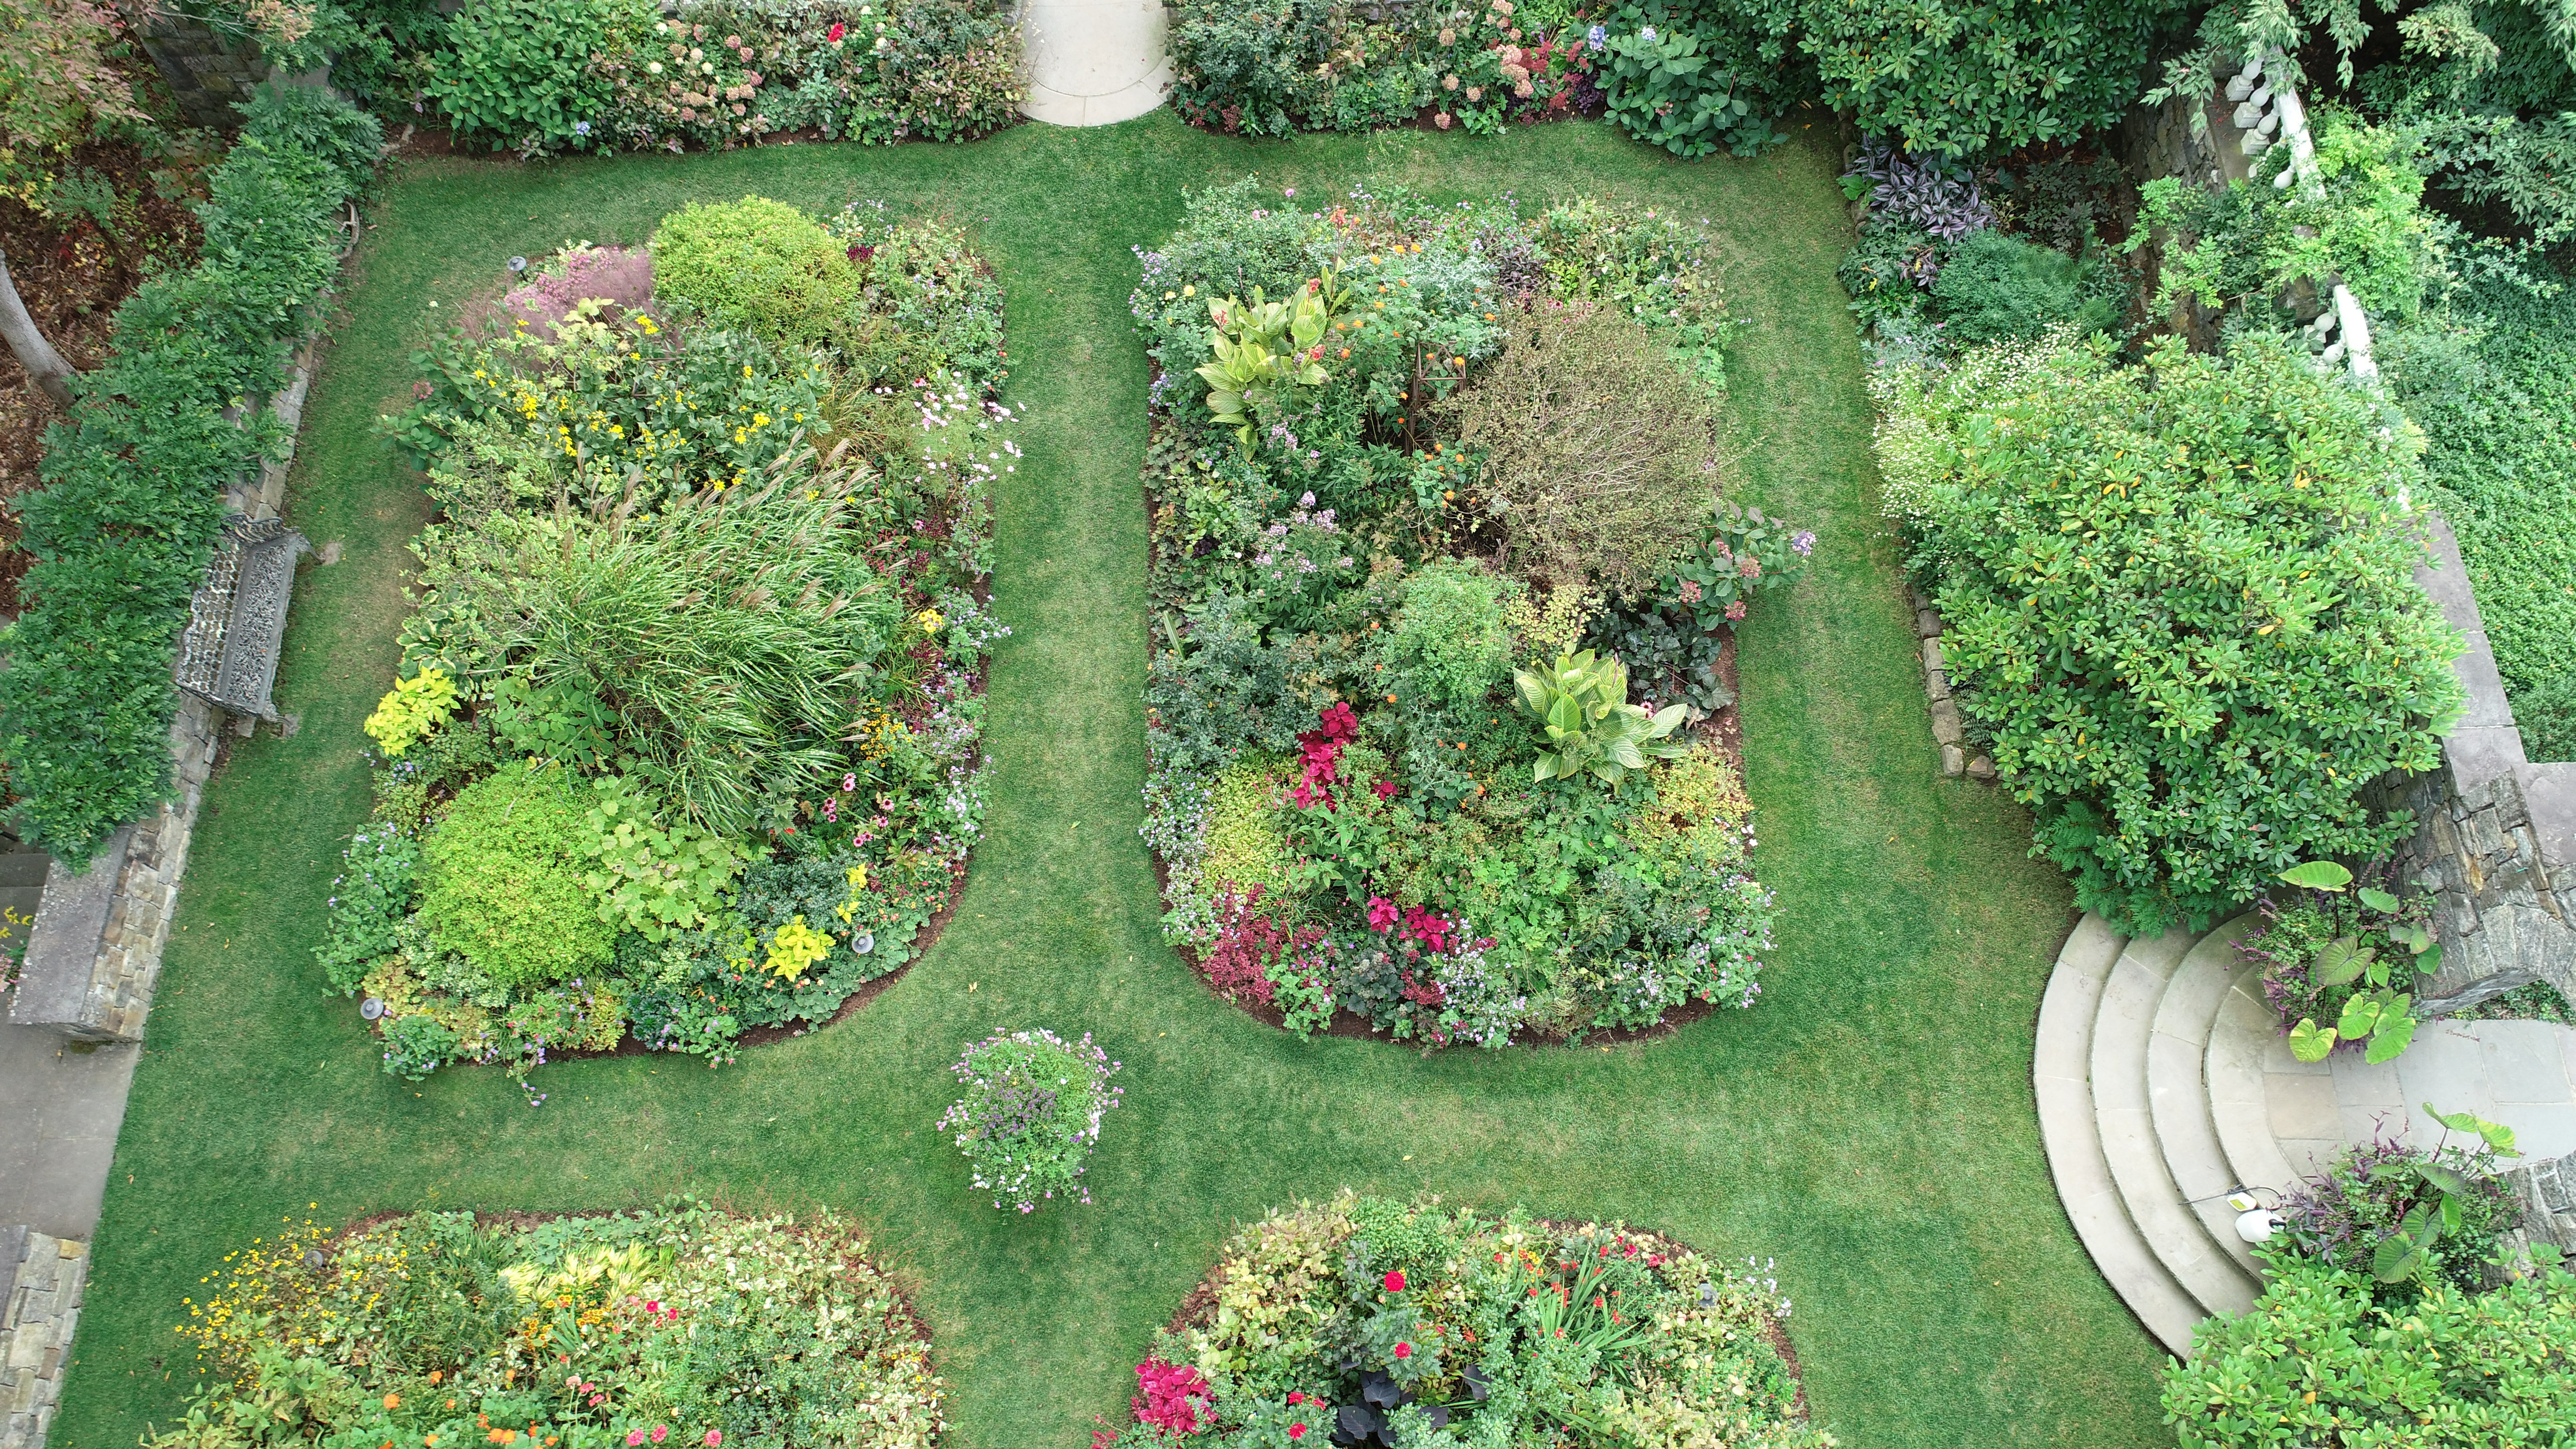 Drone views of gardens can reveal plant density as well as under or unutilized space. Can you spot areas in these gardens that might be ‘opportunity’ spots for next year? THG AVIATION